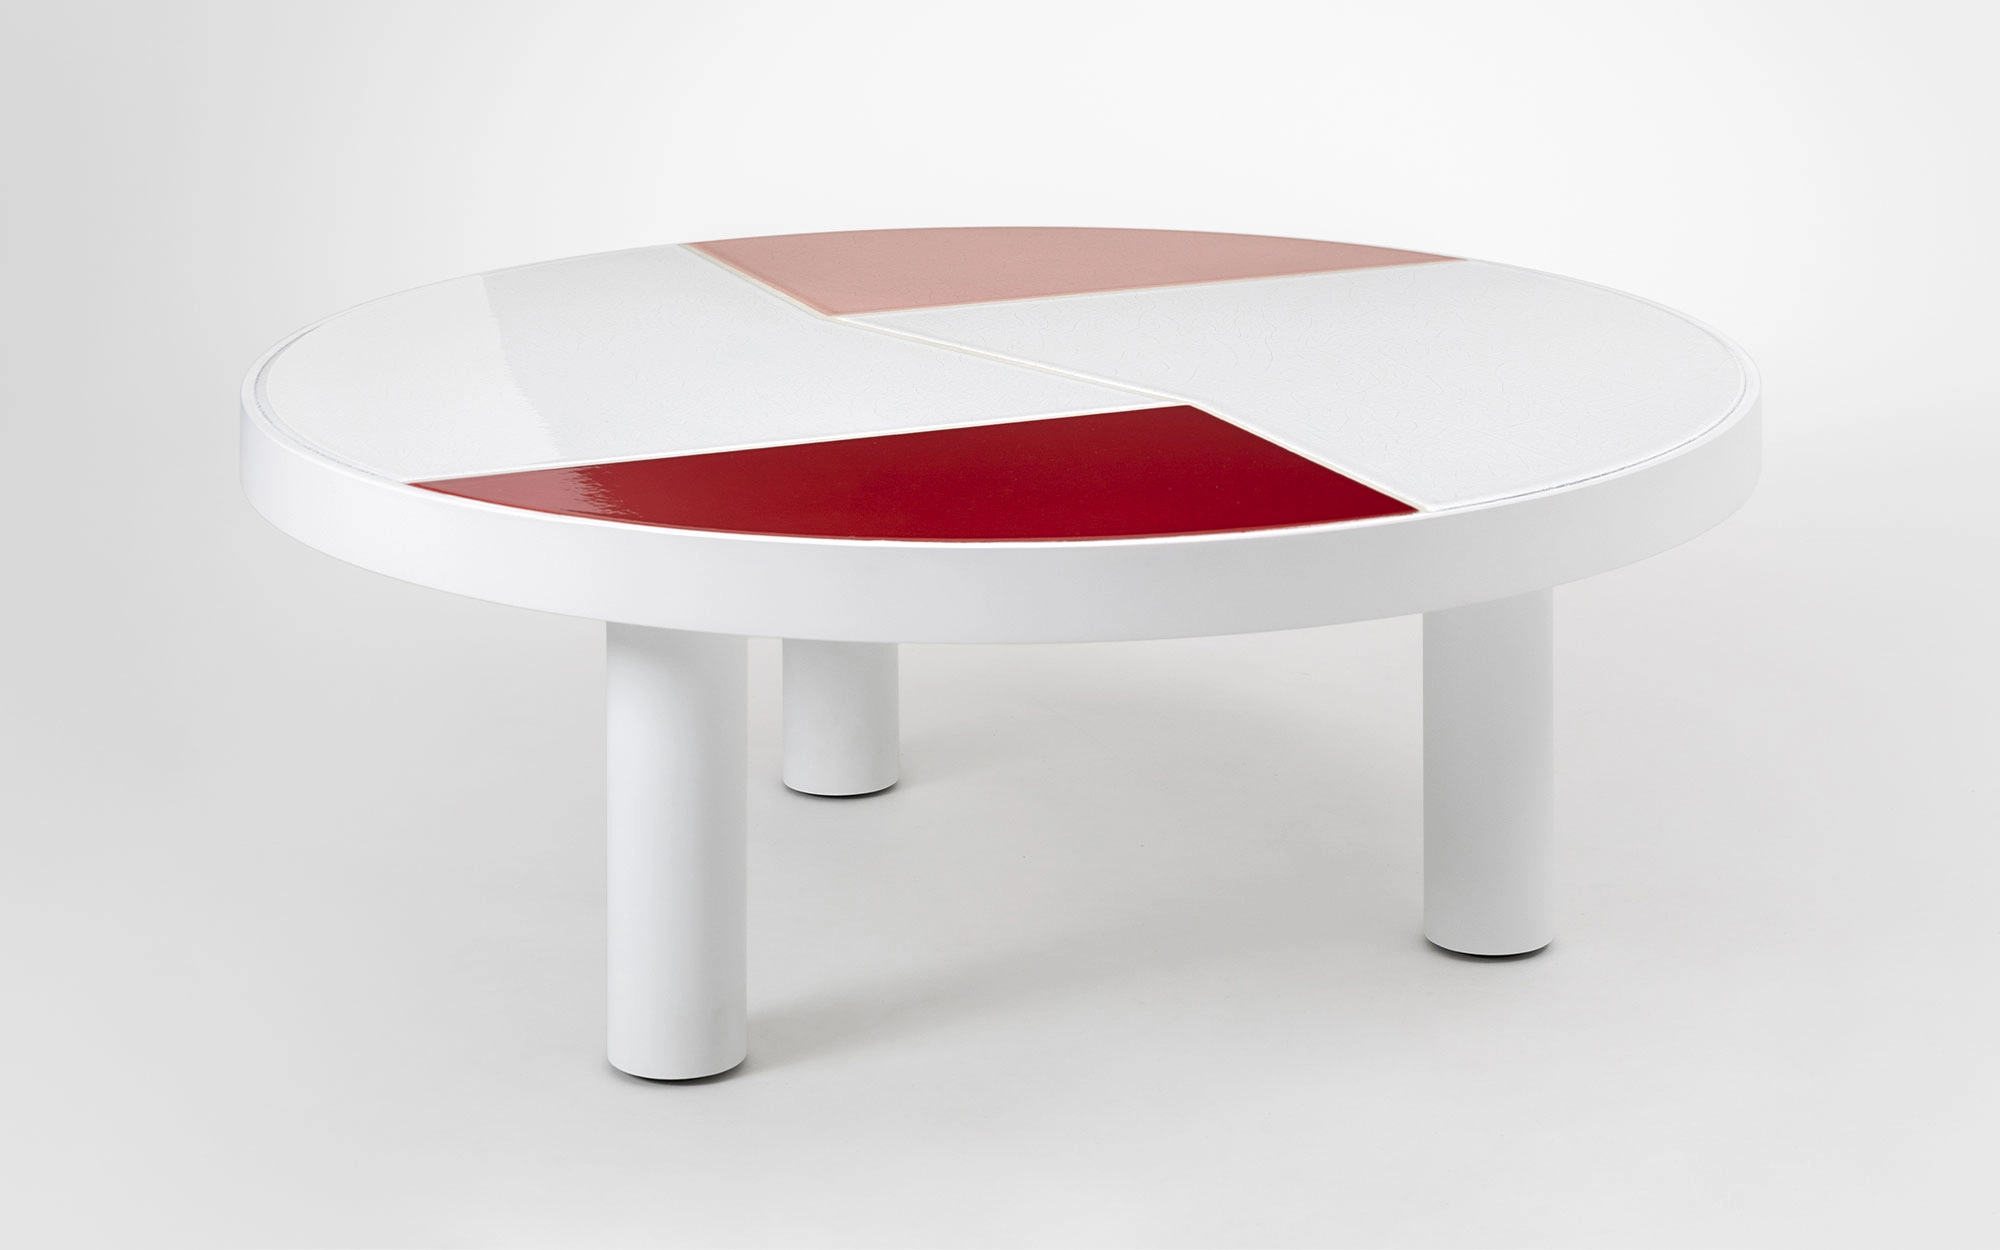 Fraction Coffee Table - Pierre Charpin - Miscellaneous - Galerie kreo